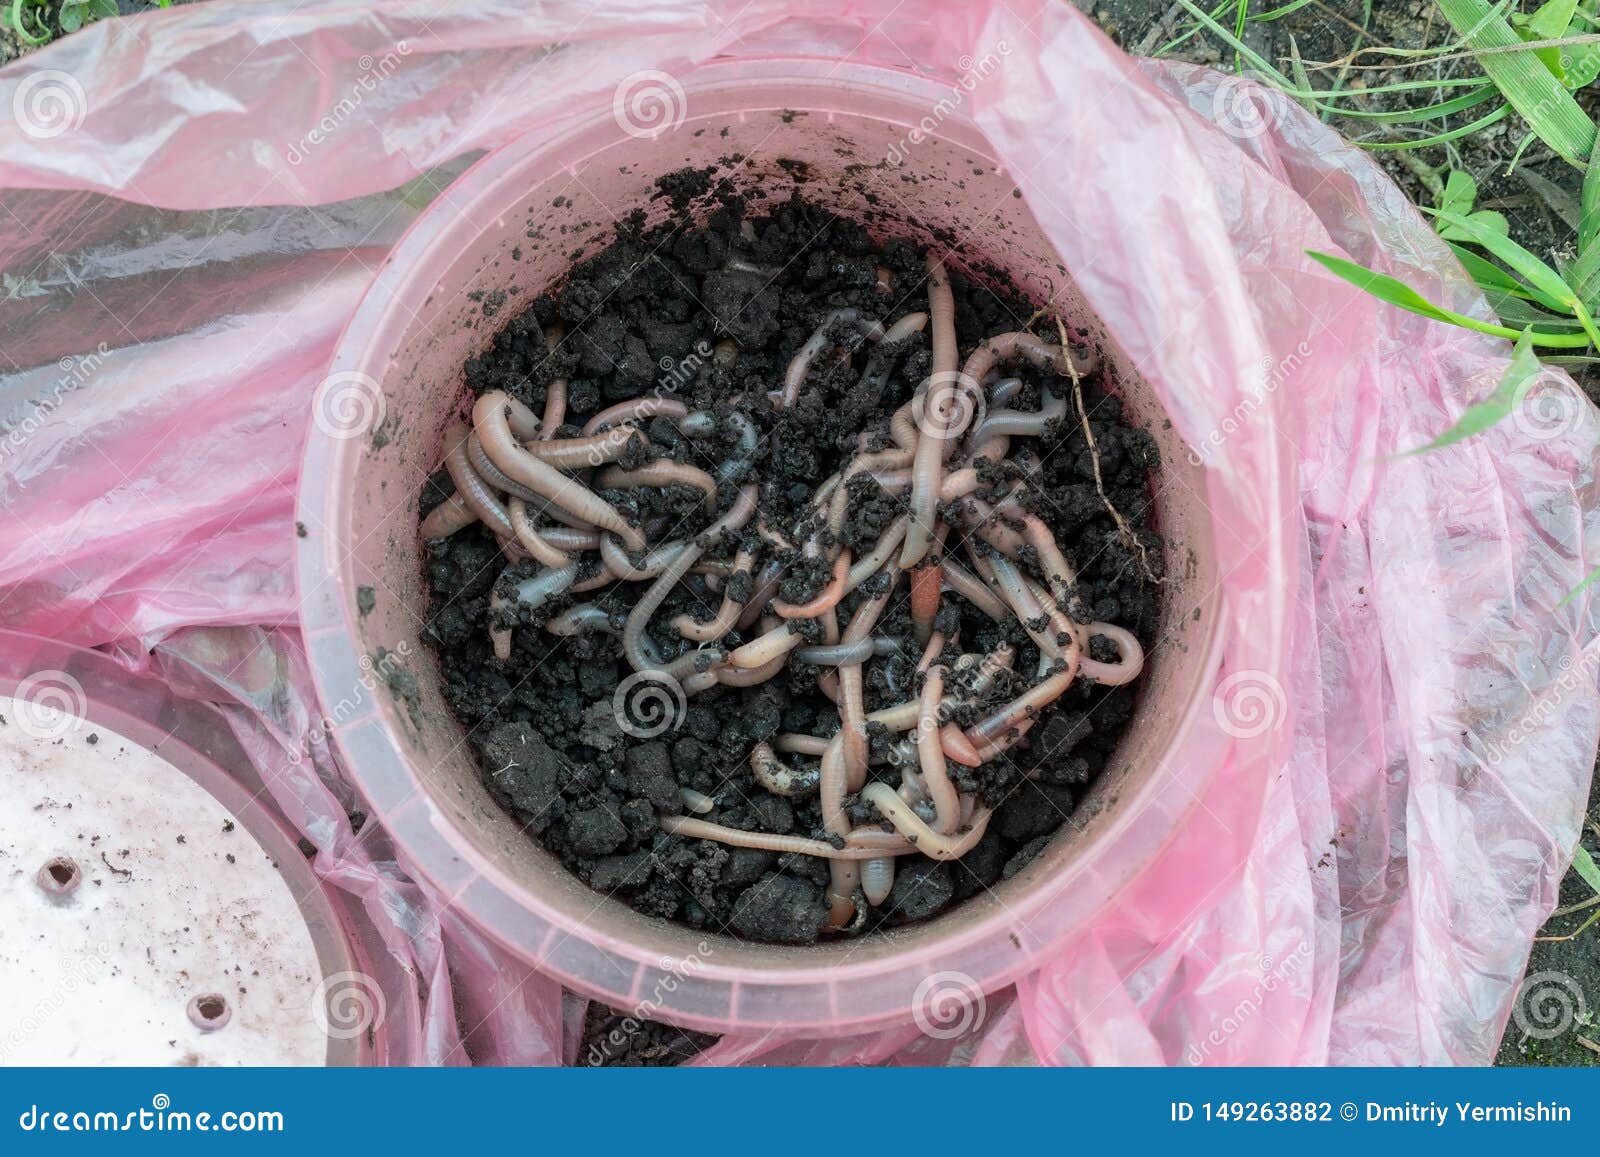 Worm fishing bait stock photo. Image of compost, composting - 149263882